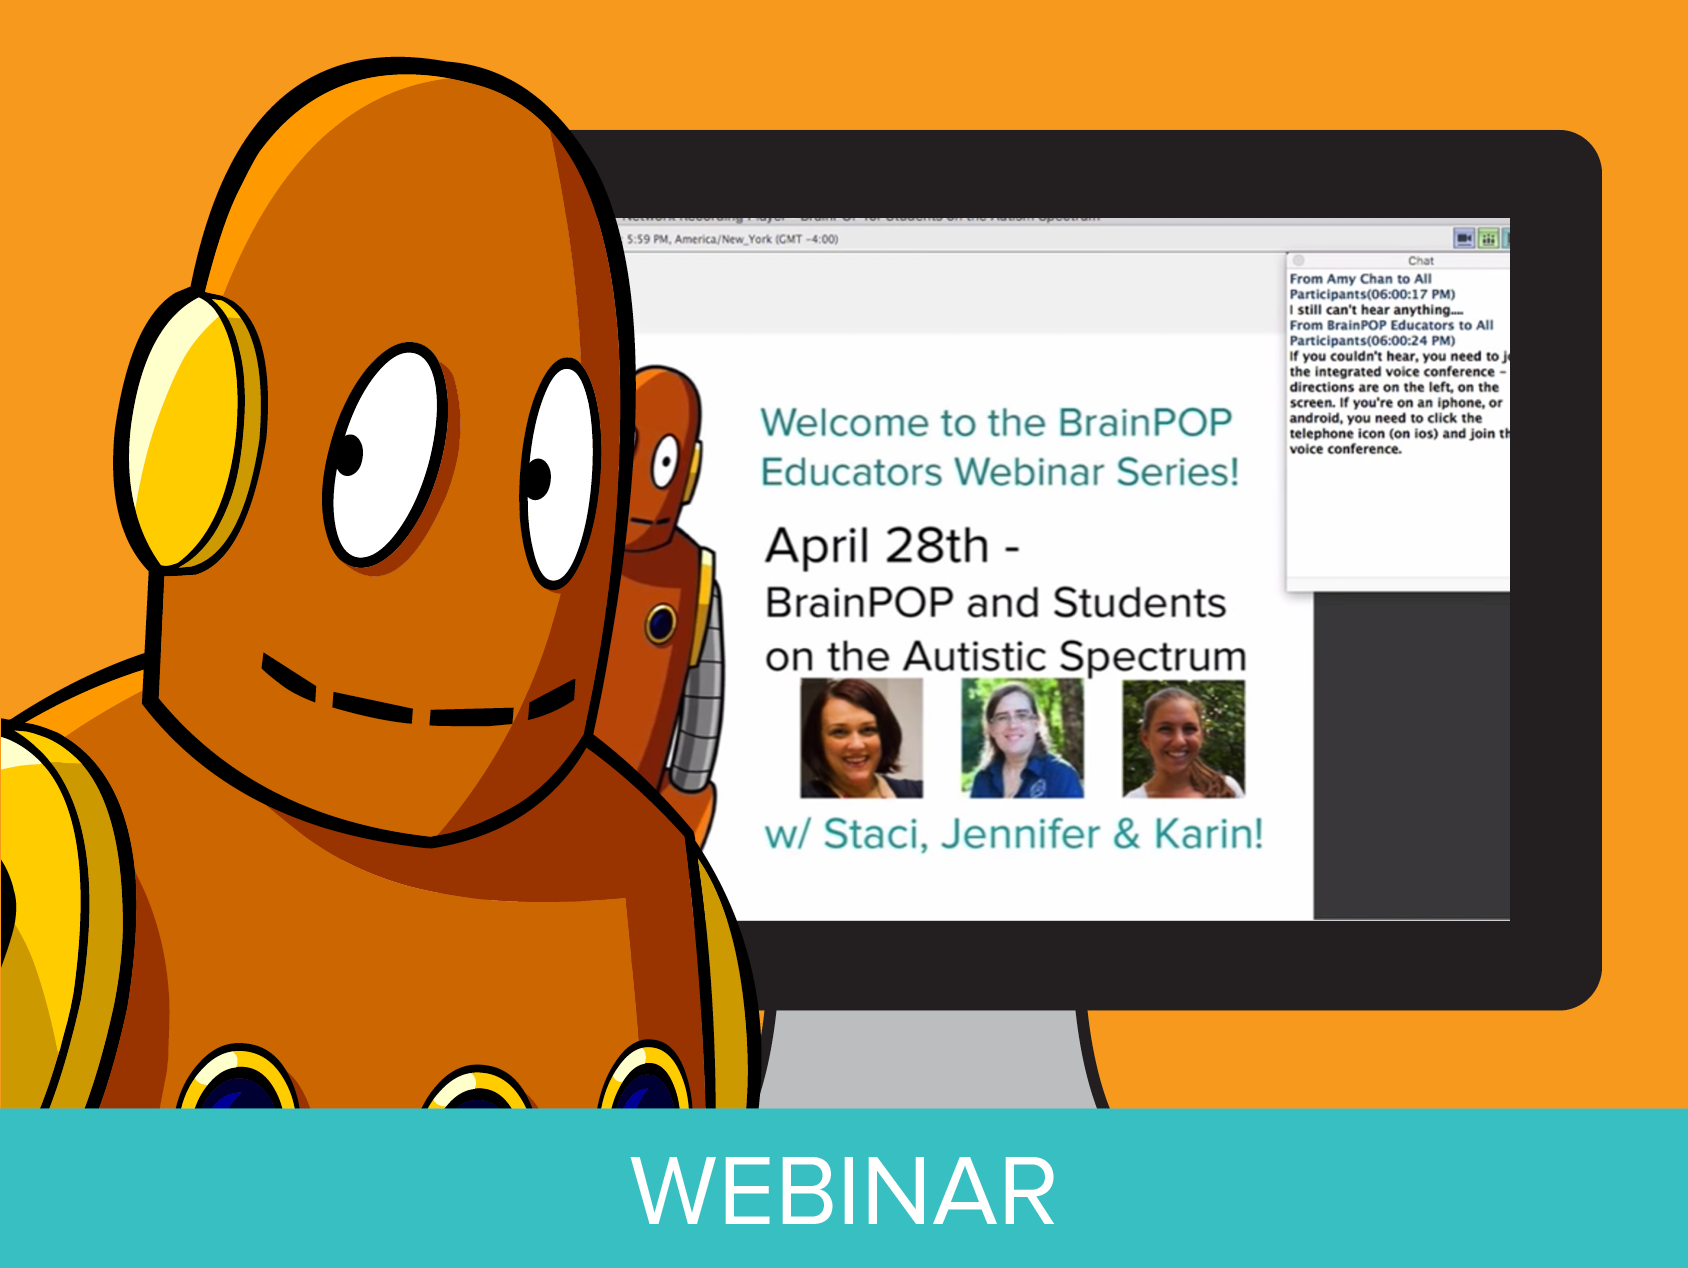 BrainPOP and Students on the Autism Spectrum